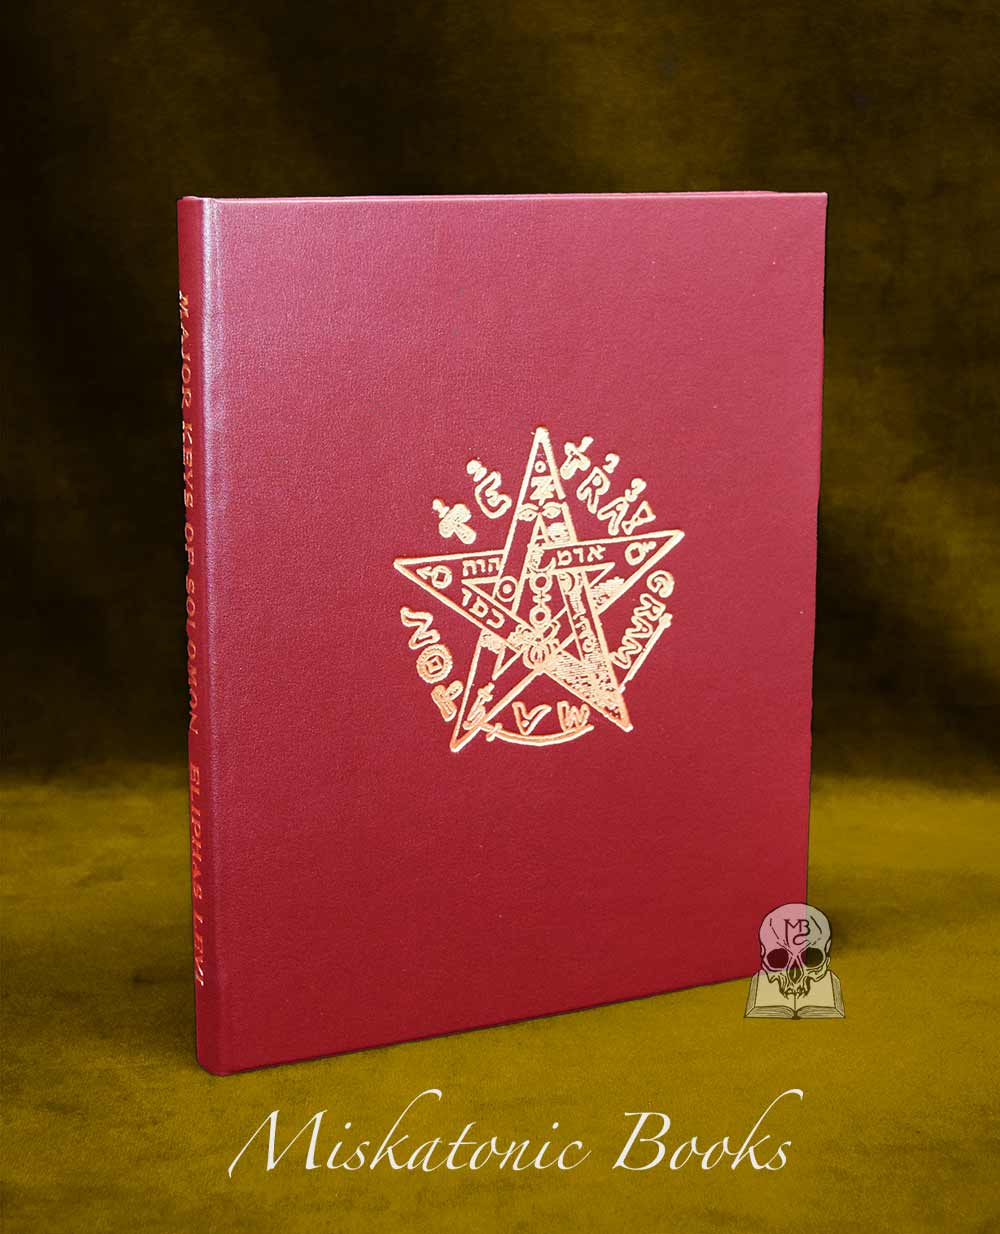 MAJOR KEYS OF SOLOMON by Eliphas Levi - Deluxe Edition in Smooth Burgundy Sheepskin